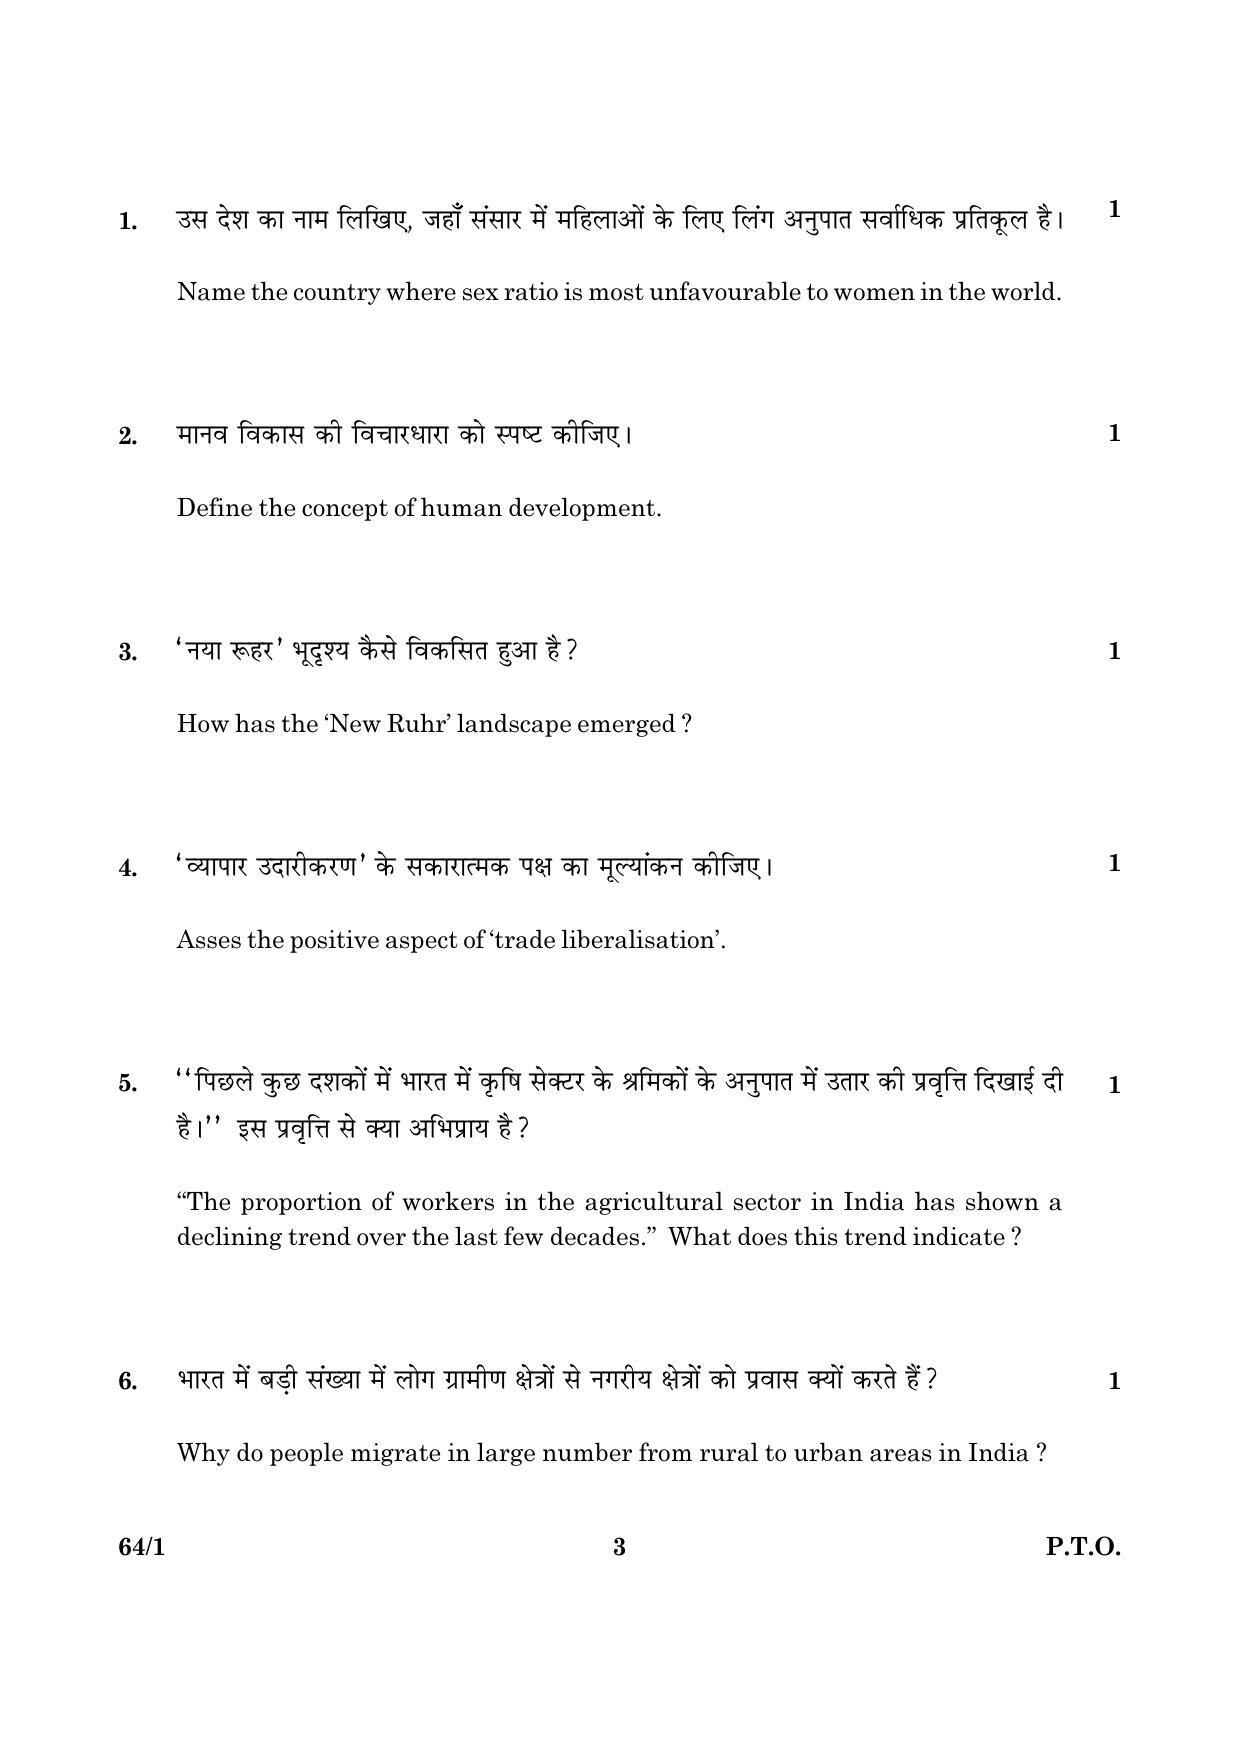 CBSE Class 12 064 Set 1 Geography 2016 Question Paper - Page 3